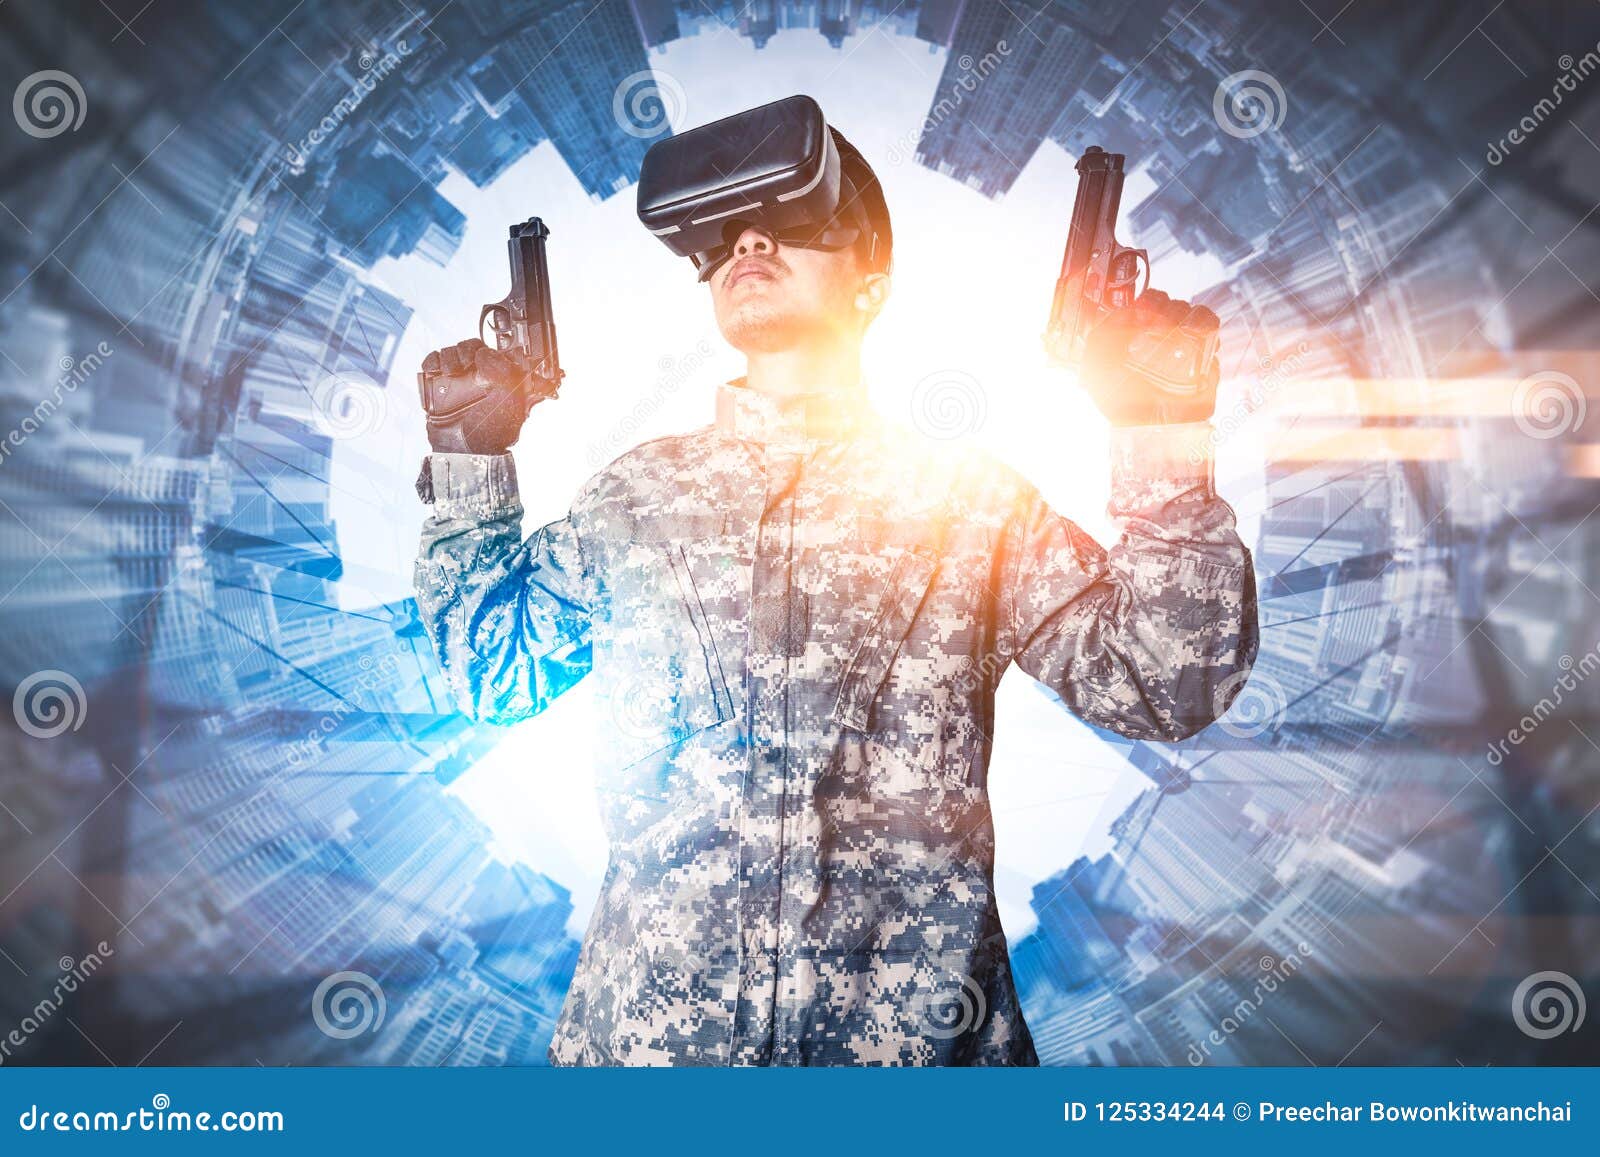 the abstract image of the soldier use a vr glasses for combat simulation training overlay with the polar coordinates city image